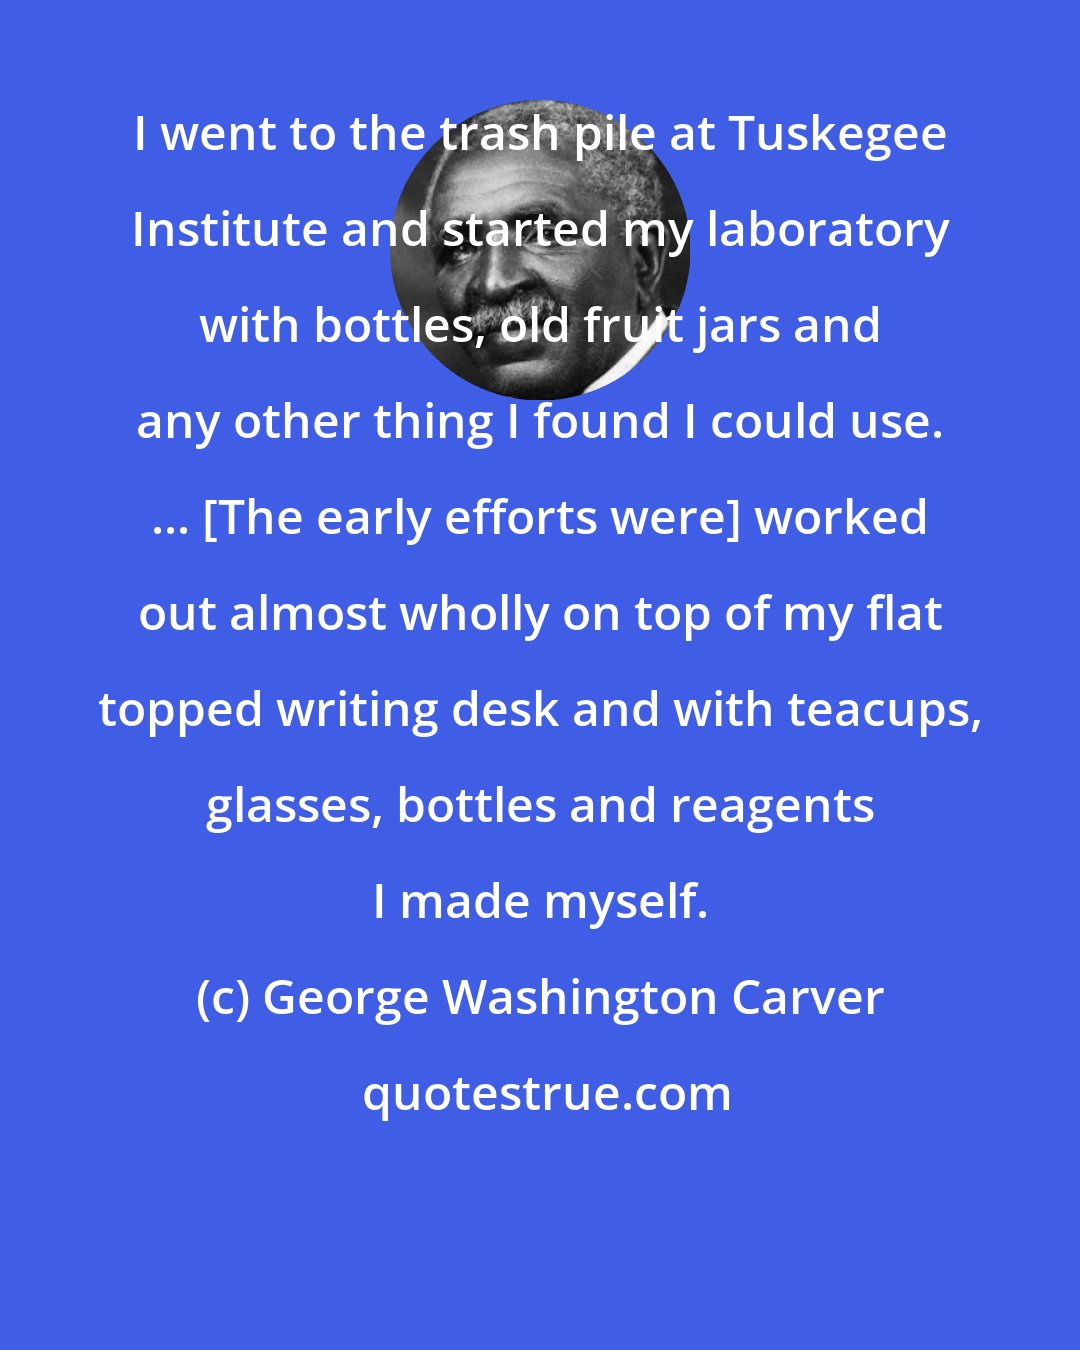 George Washington Carver: I went to the trash pile at Tuskegee Institute and started my laboratory with bottles, old fruit jars and any other thing I found I could use. ... [The early efforts were] worked out almost wholly on top of my flat topped writing desk and with teacups, glasses, bottles and reagents I made myself.